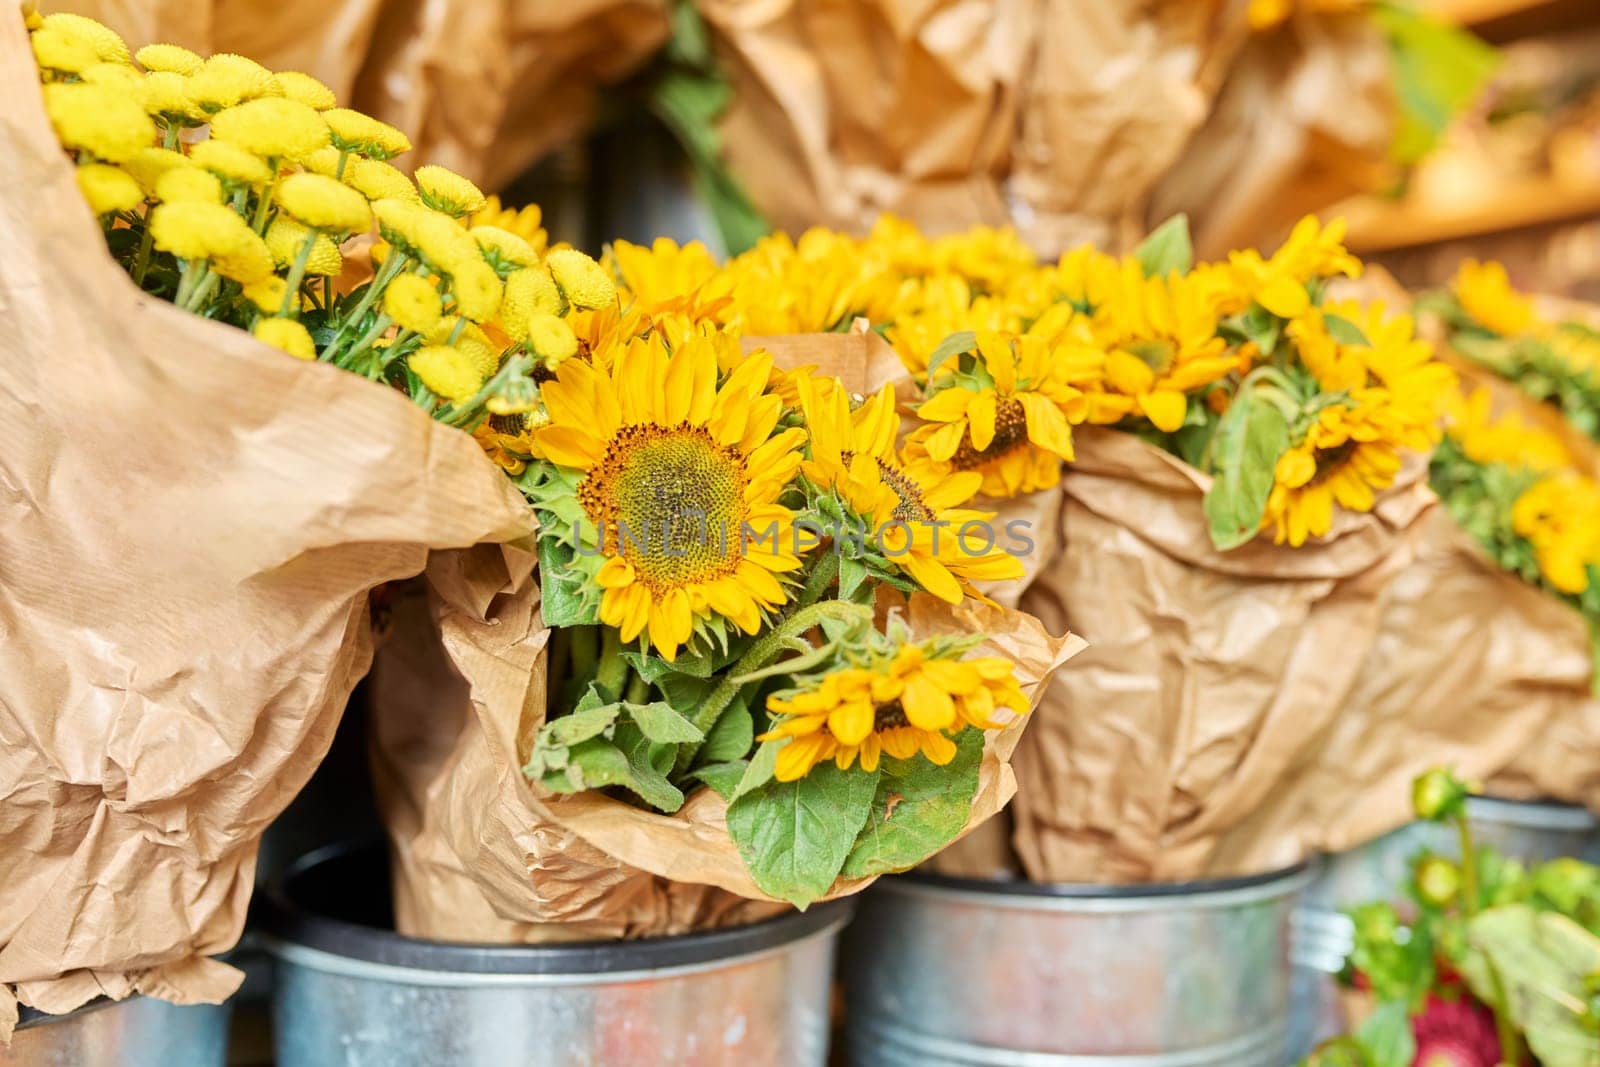 Flower shop, close-up of fresh flowers in buckets, yellow decorative sunflowers. Floristics, small business, flower decoration of apartments, houses, offices, gifts for holidays, summer autumn season